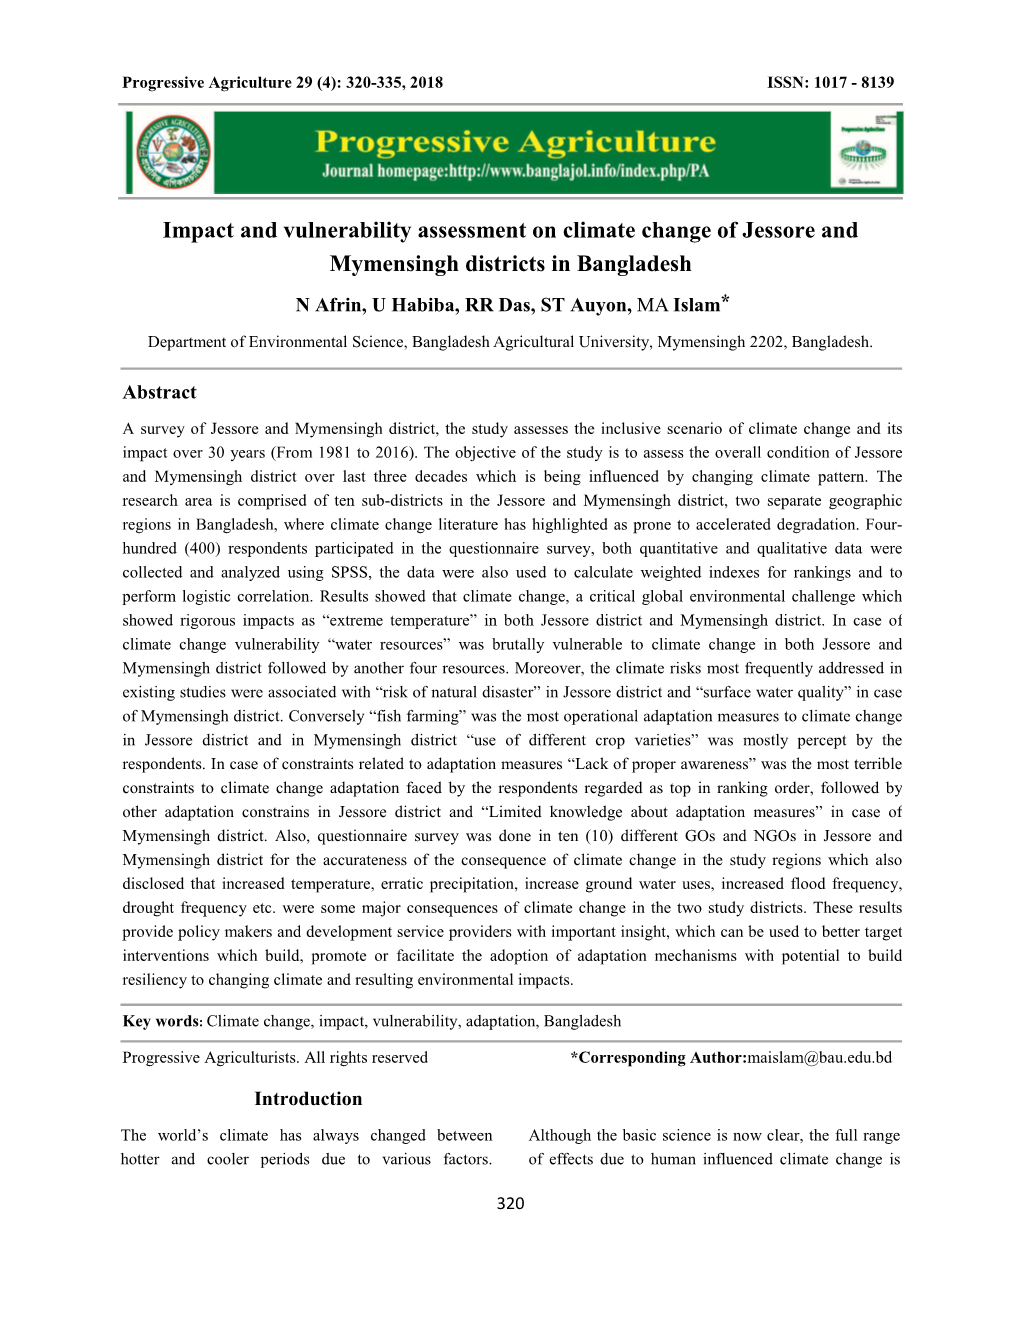 Impact and Vulnerability Assessment on Climate Change of Jessore and Mymensingh Districts in Bangladesh